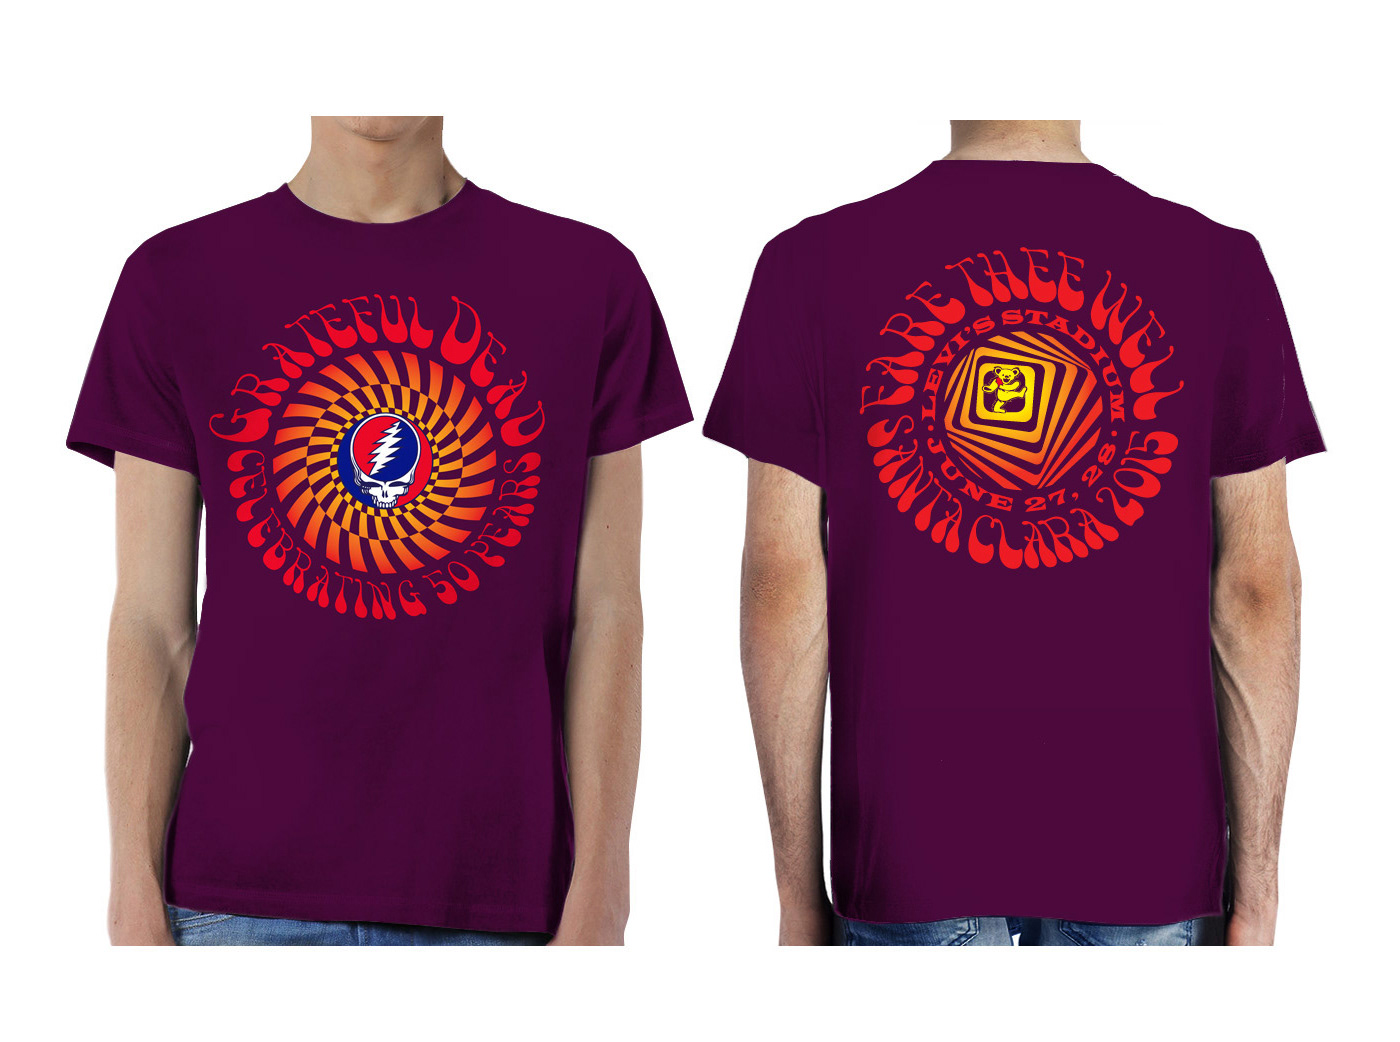 Grateful Dead "Fare Thee Well" Logotype & Spral T-shirt design by Christopher Jennings